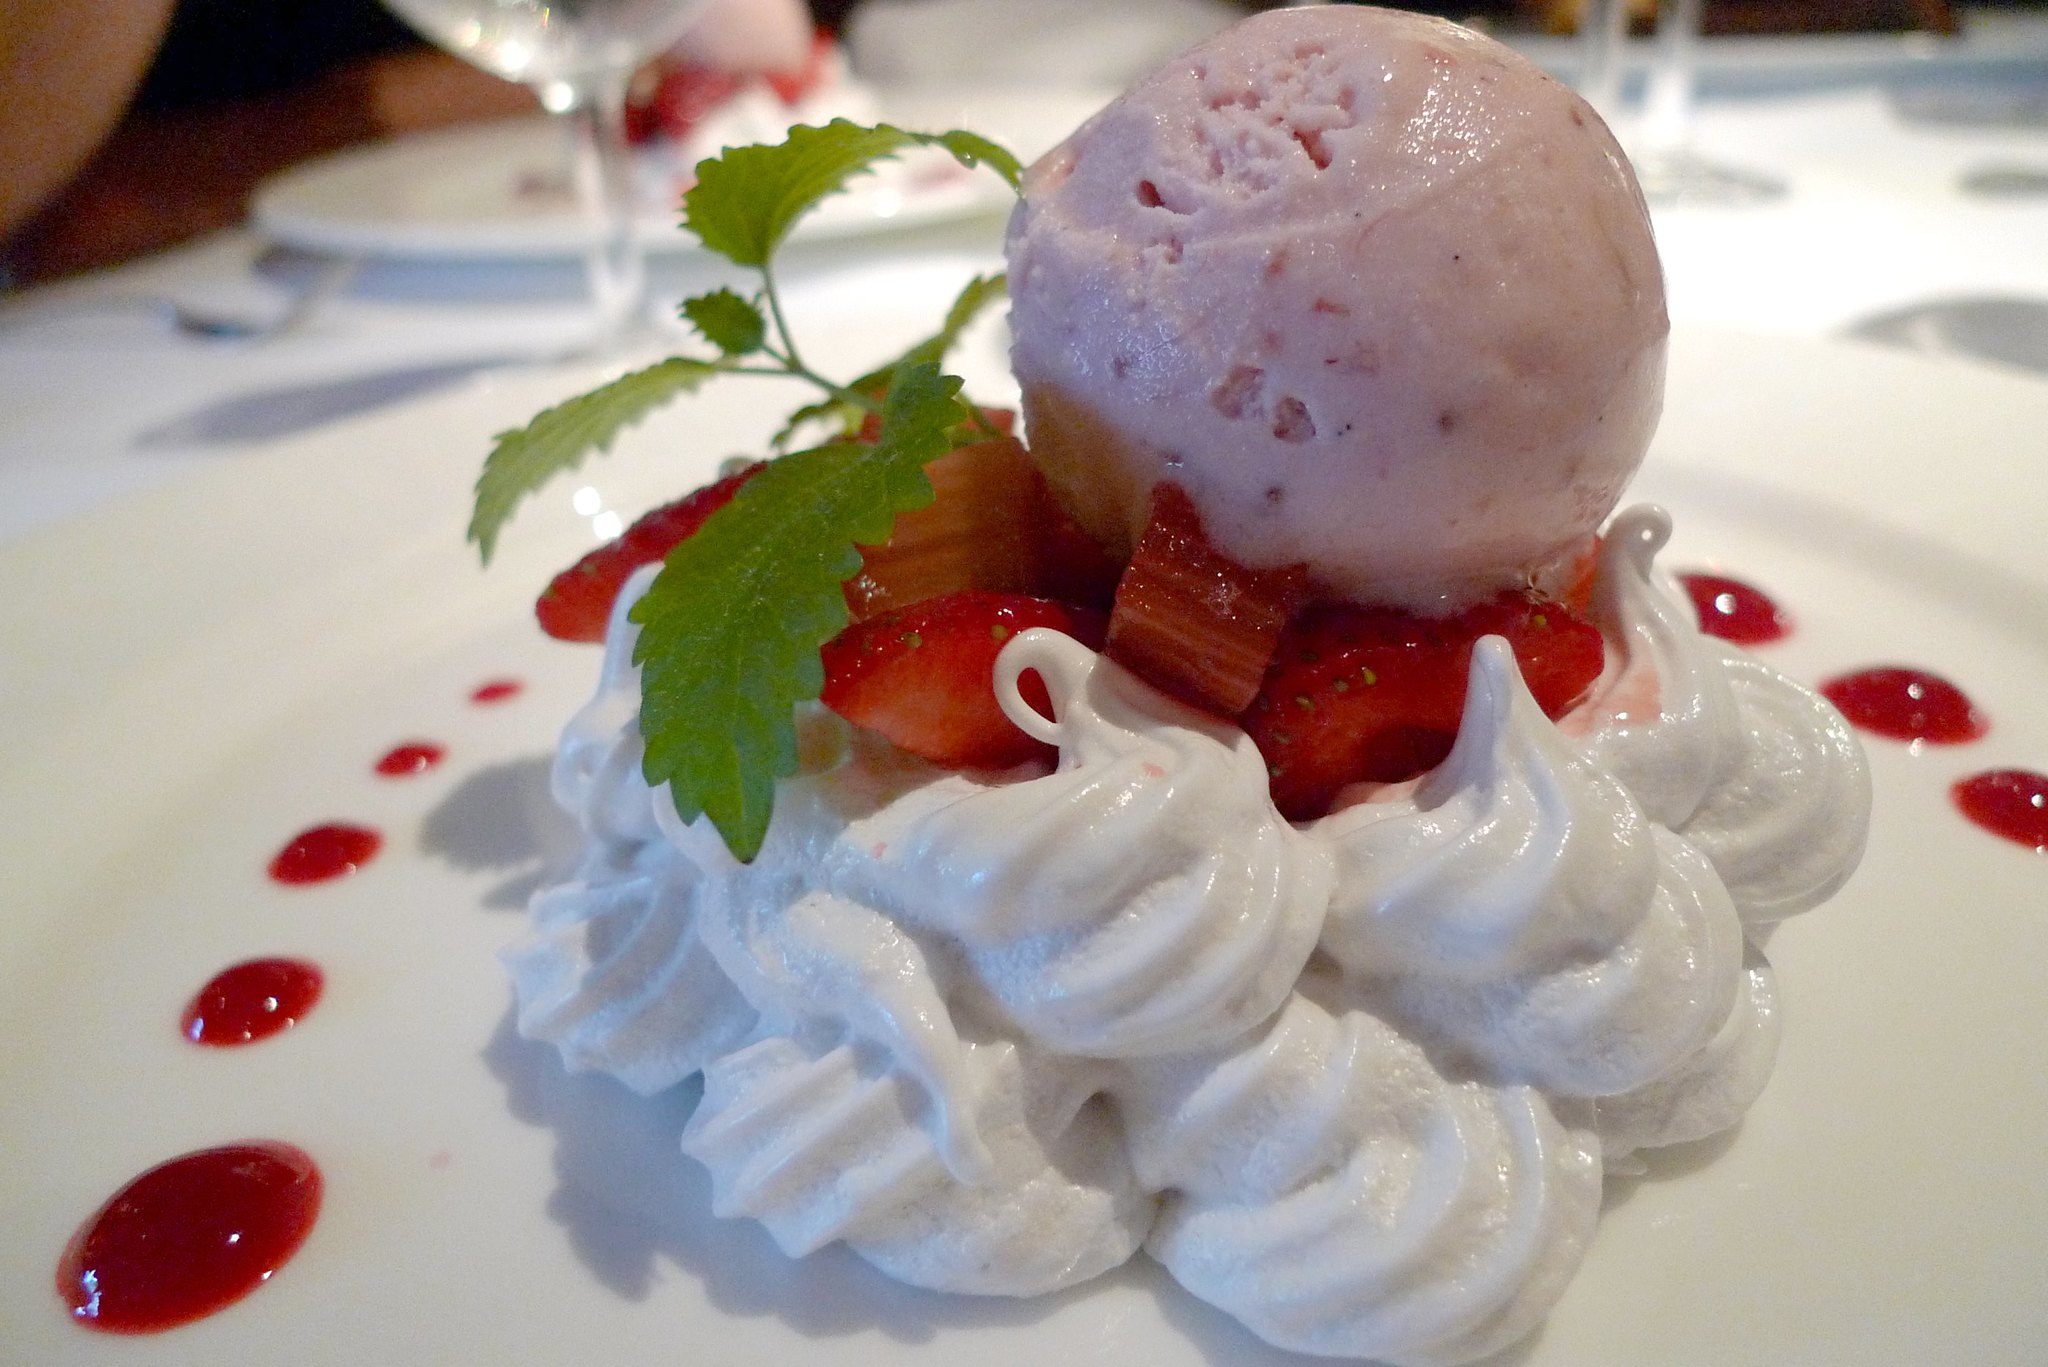 A dessert of pink ice cream served on top of strawberries, rhubarb, and meringue.